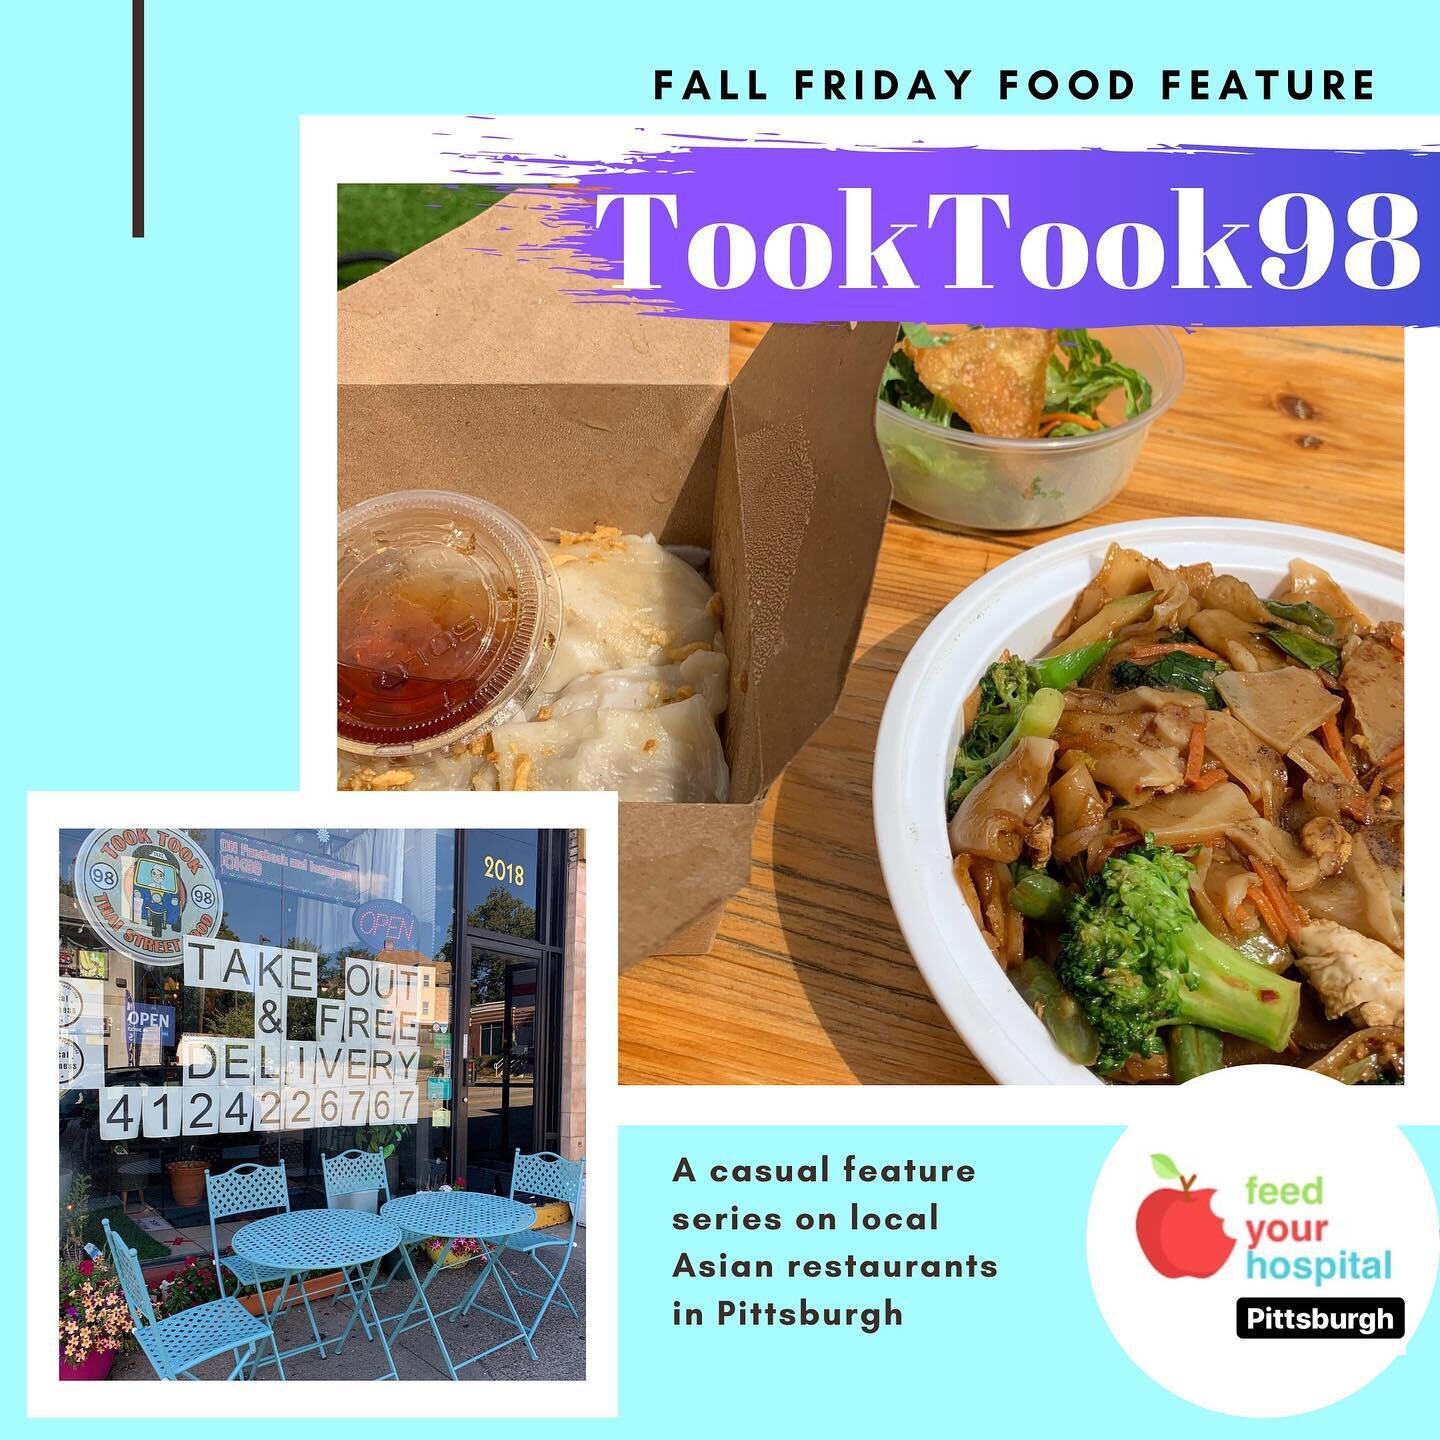 SO GOOD WE DIDN&rsquo;T SHARE IT. 🍚 the Meal: pad see ew (drunken noodles) and pan fried Thai dumplings. 
⏭ swipe to see restaurant hours and their founding story featured in @pghcitypaper 
✨
📸 credit to @atlantic.tien
🎏 About our Fall Friday Food